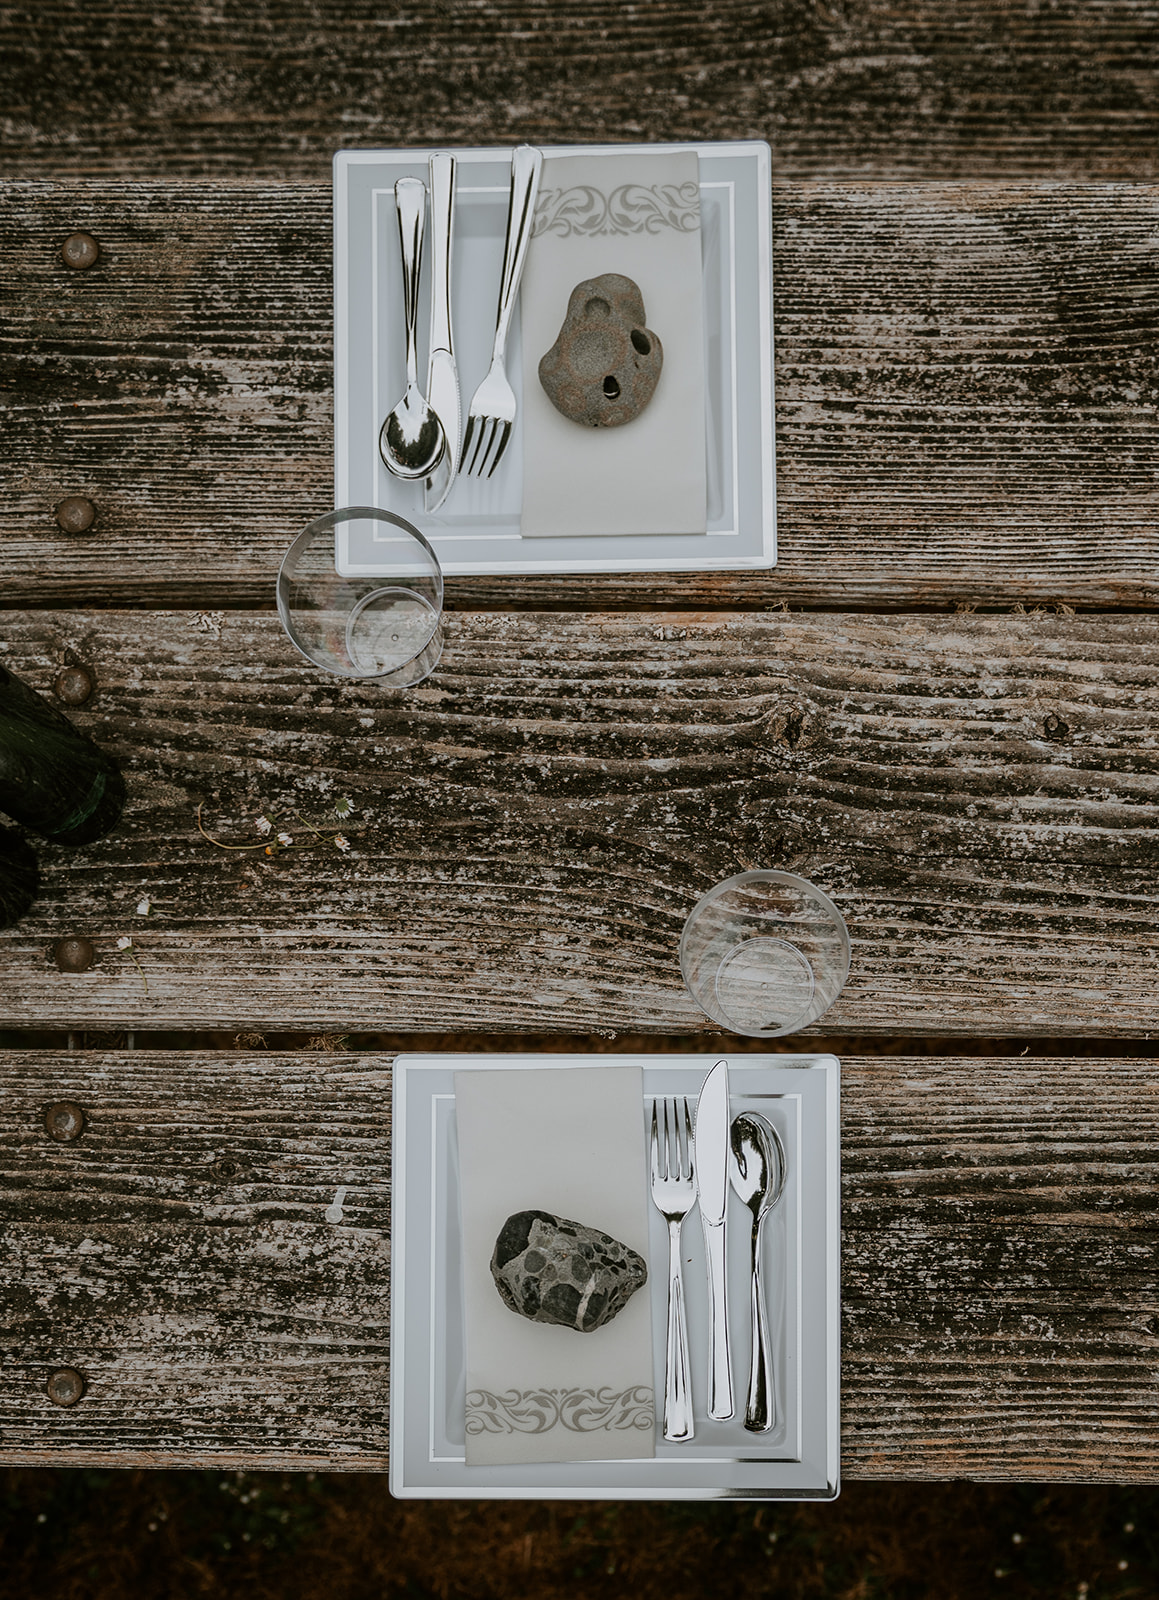 Outdoor wedding plate ideas - how to hold napkins down in the wind